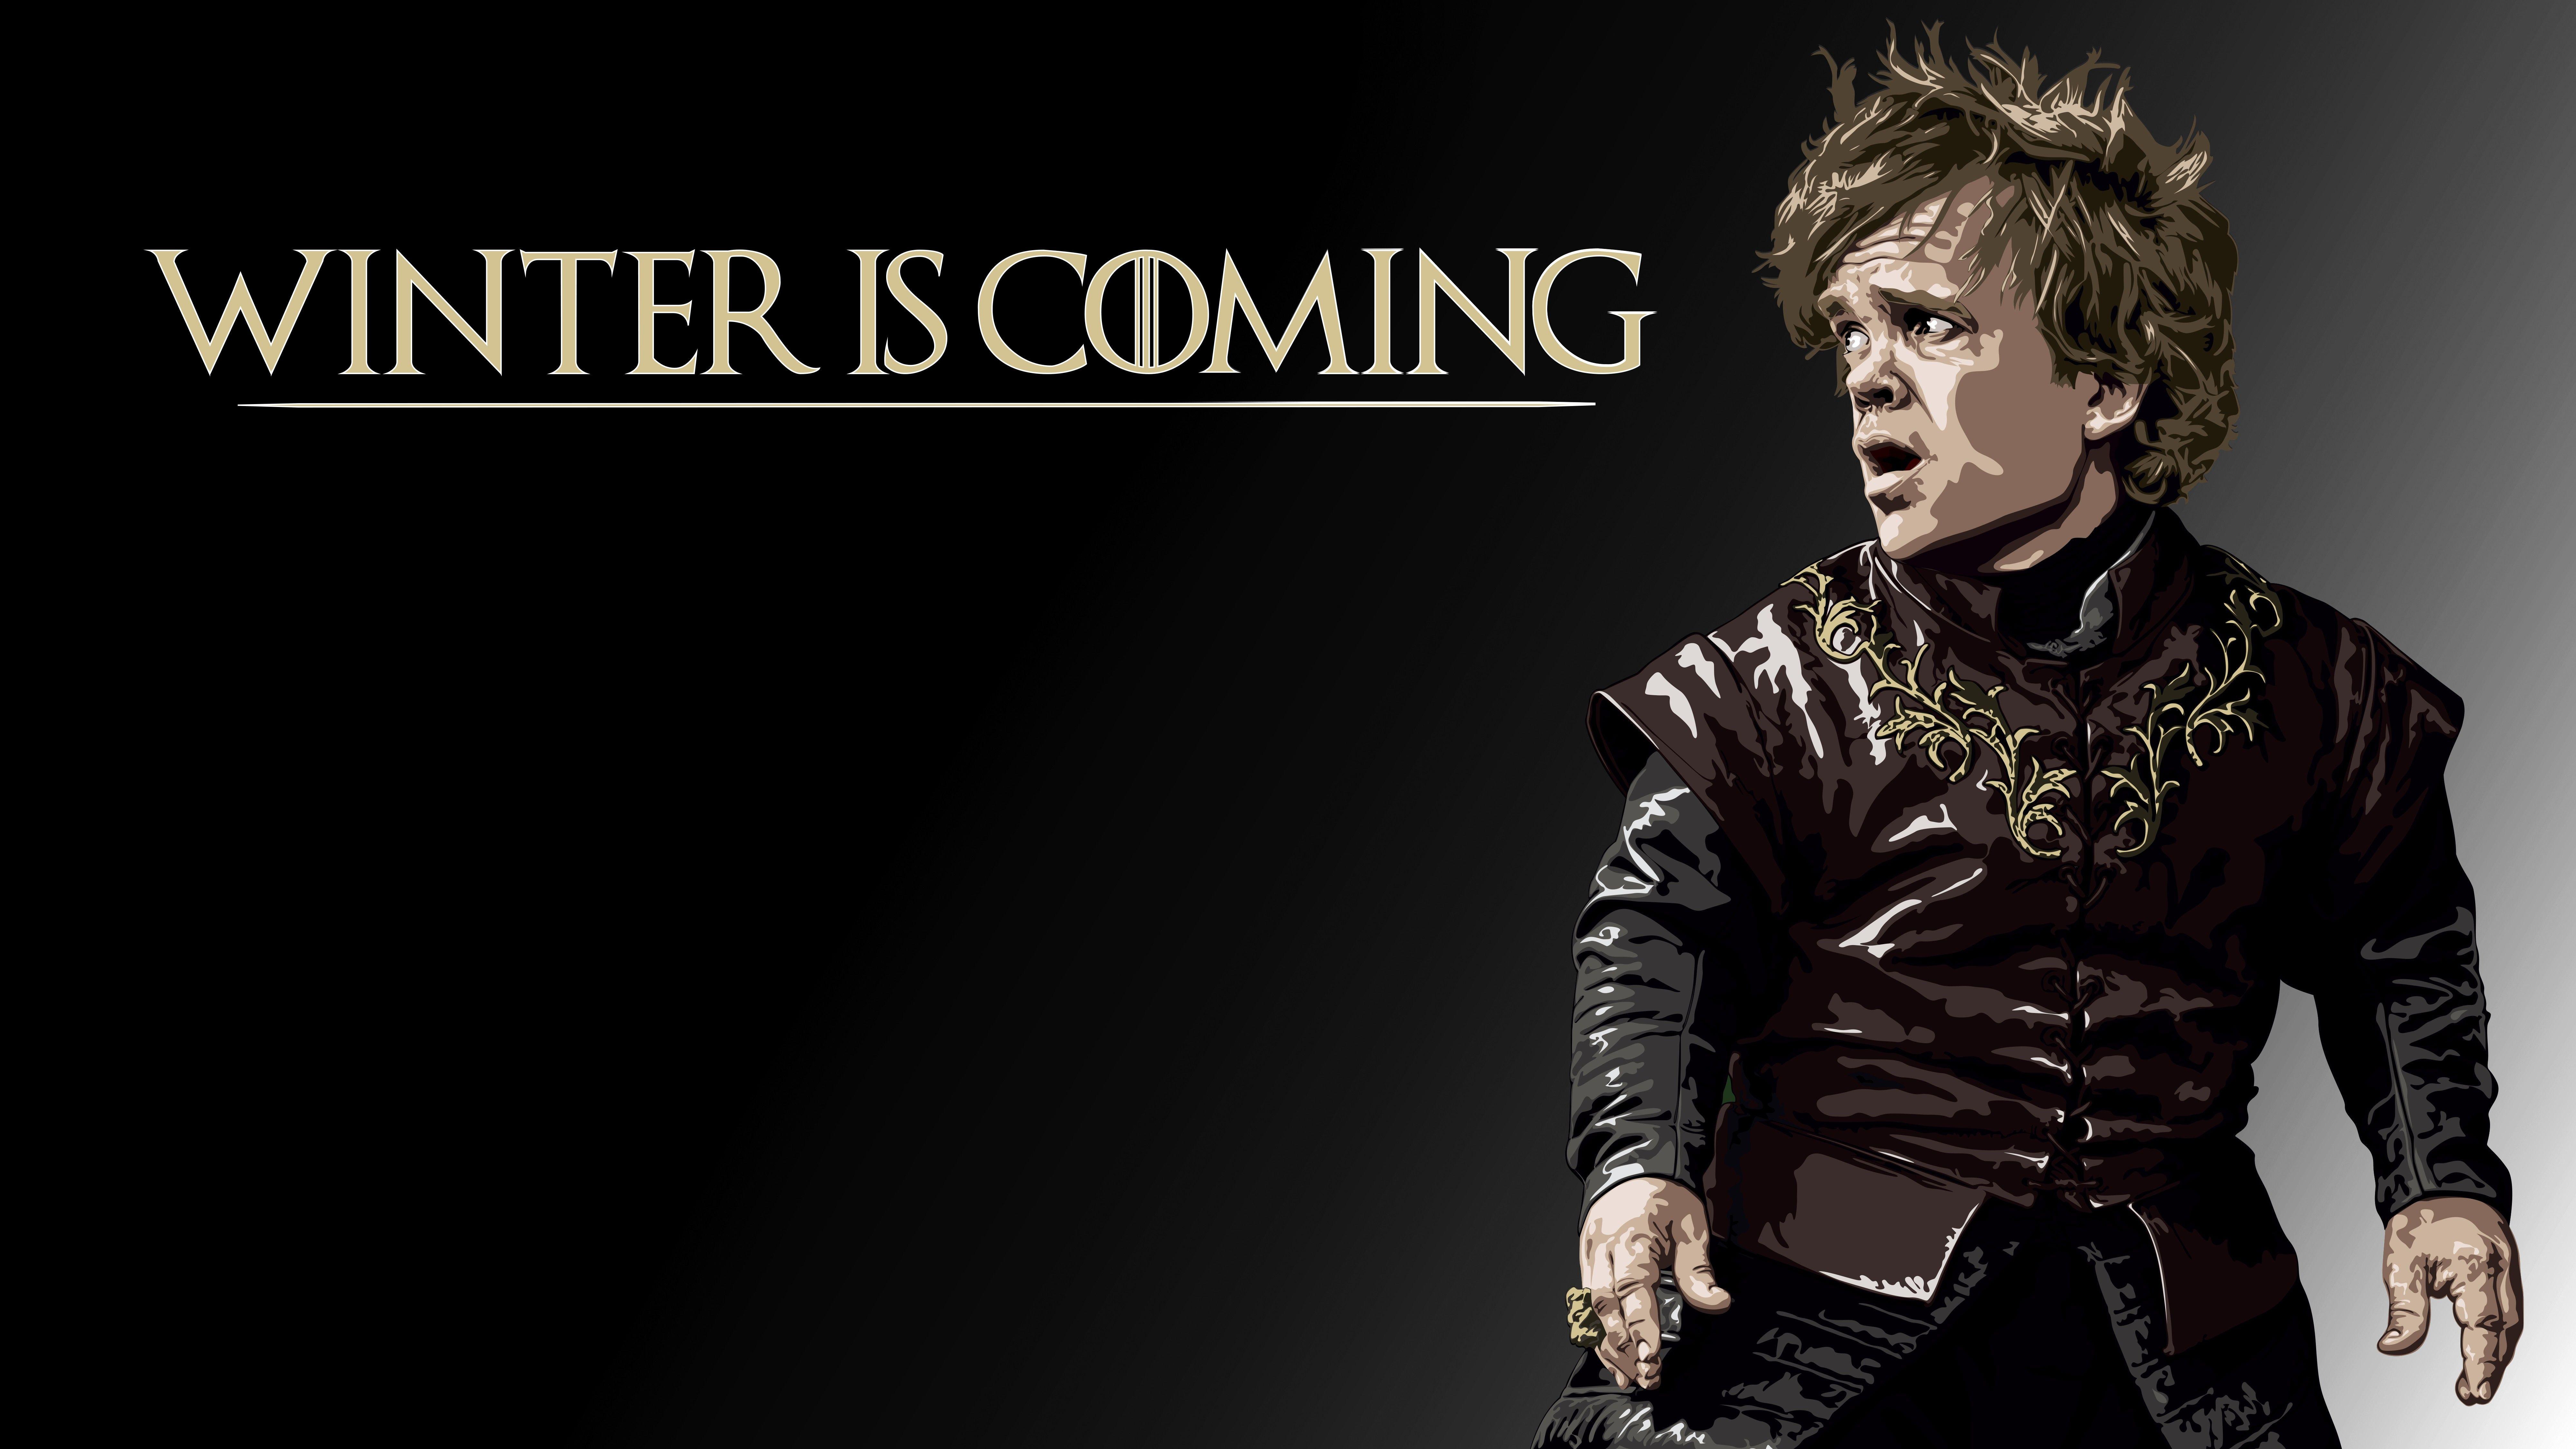 Game Of Thrones, Winter Is Coming, Tyrion Lannister Wallpaper HD